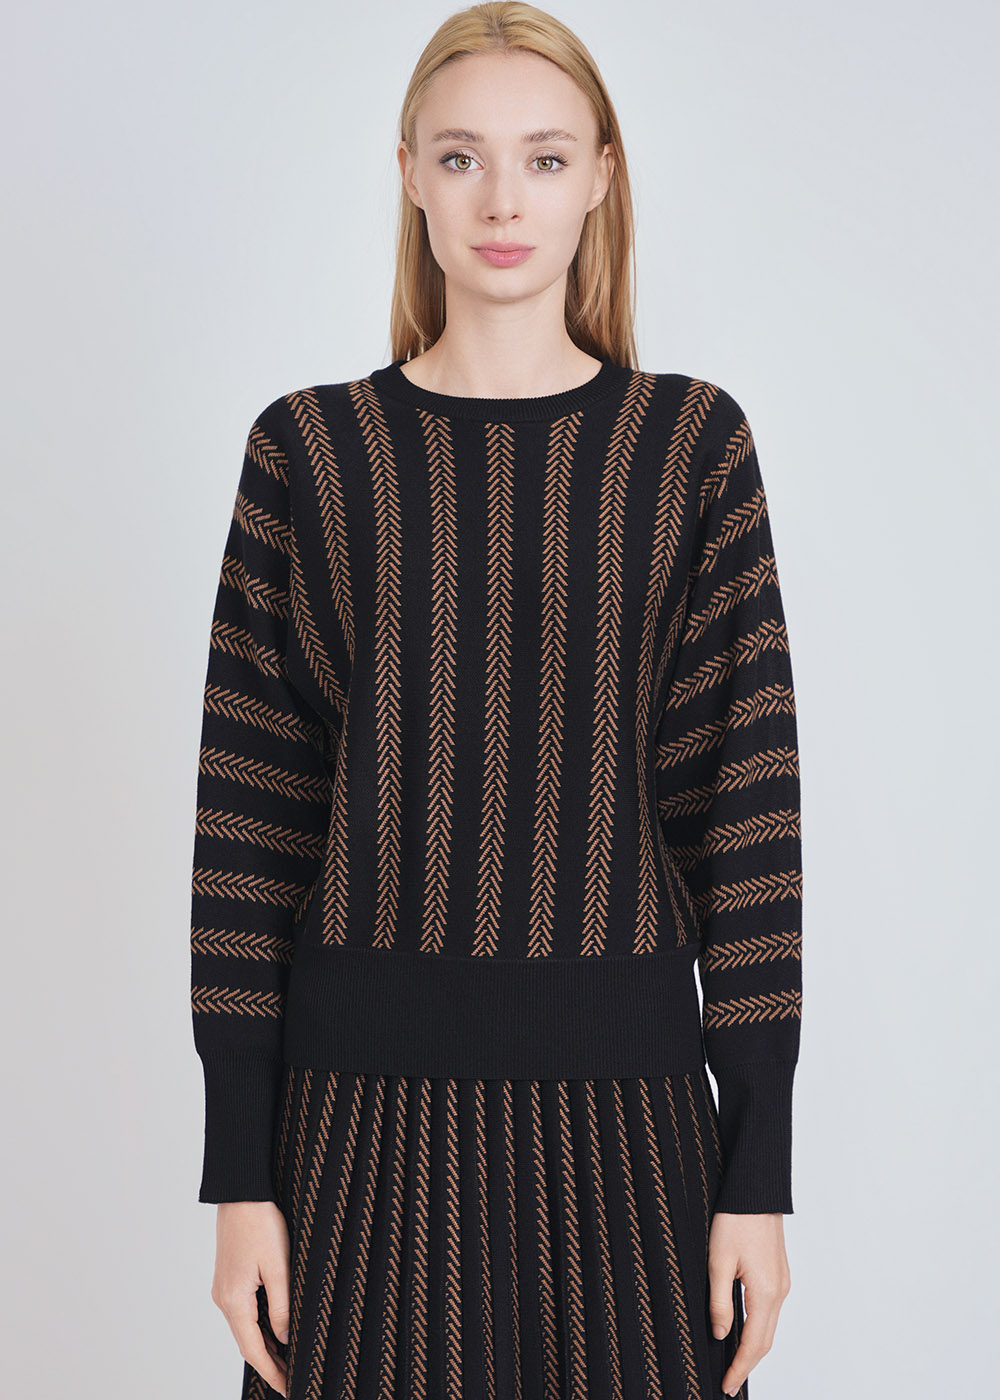 Refined Black Knit with Camel Features